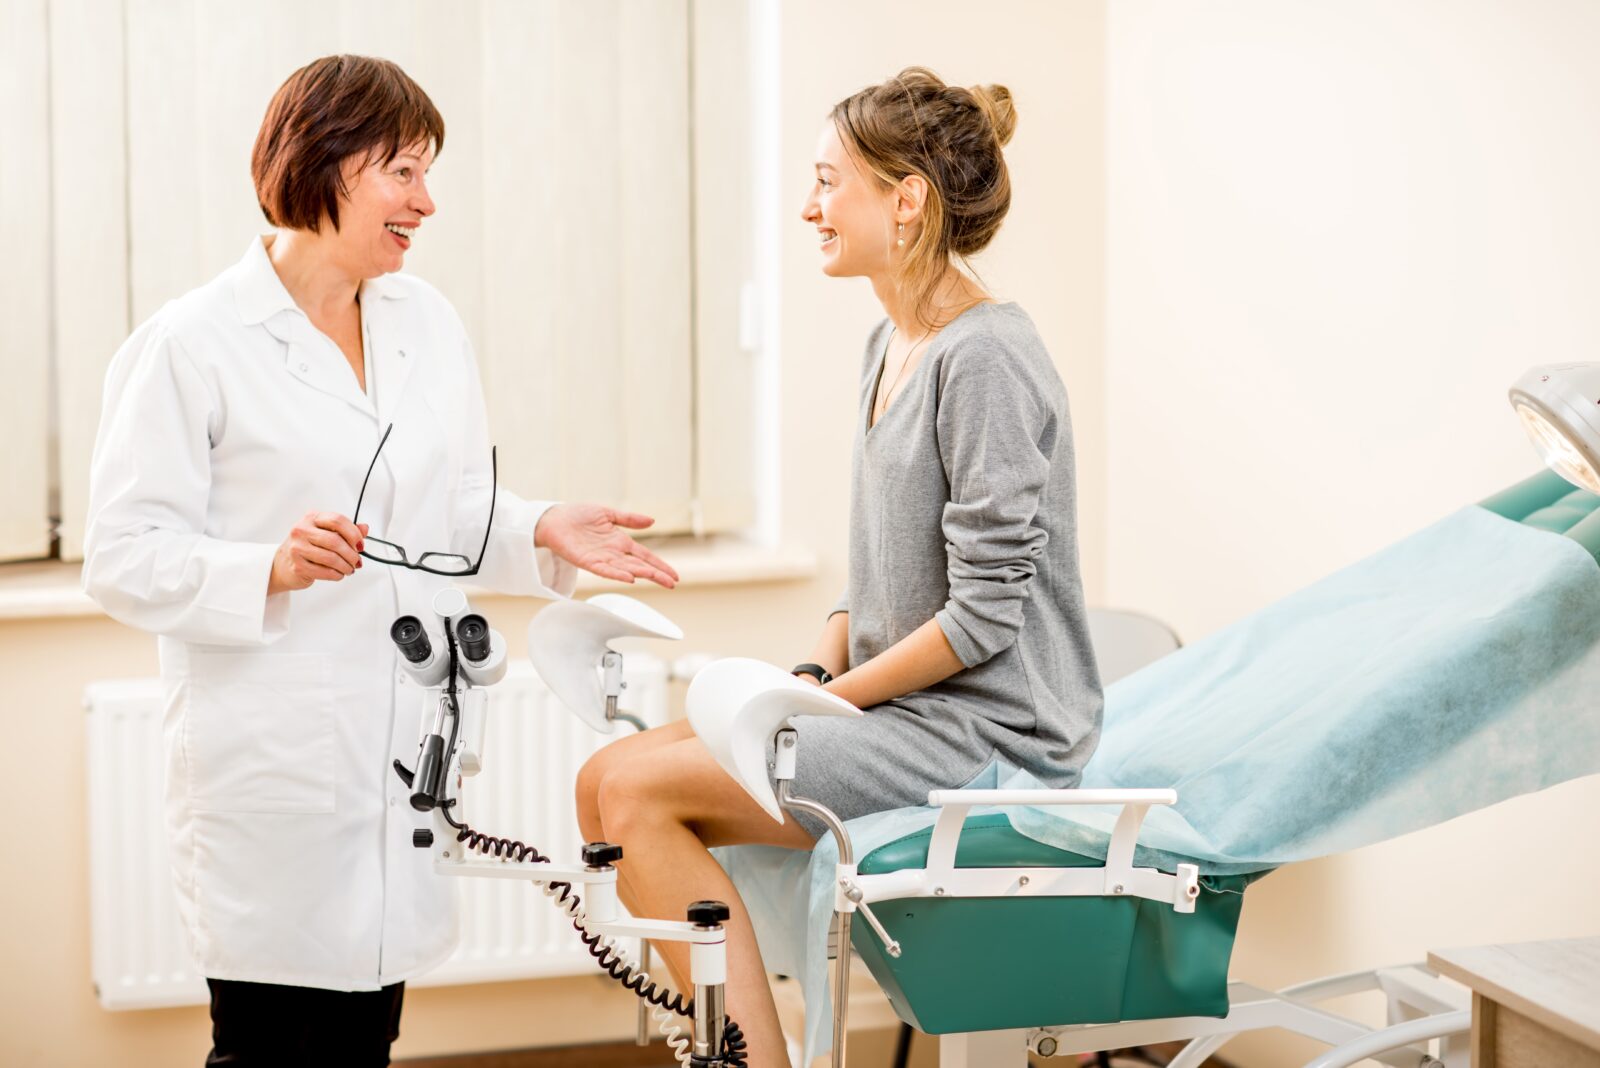 gynecologist talking to patient